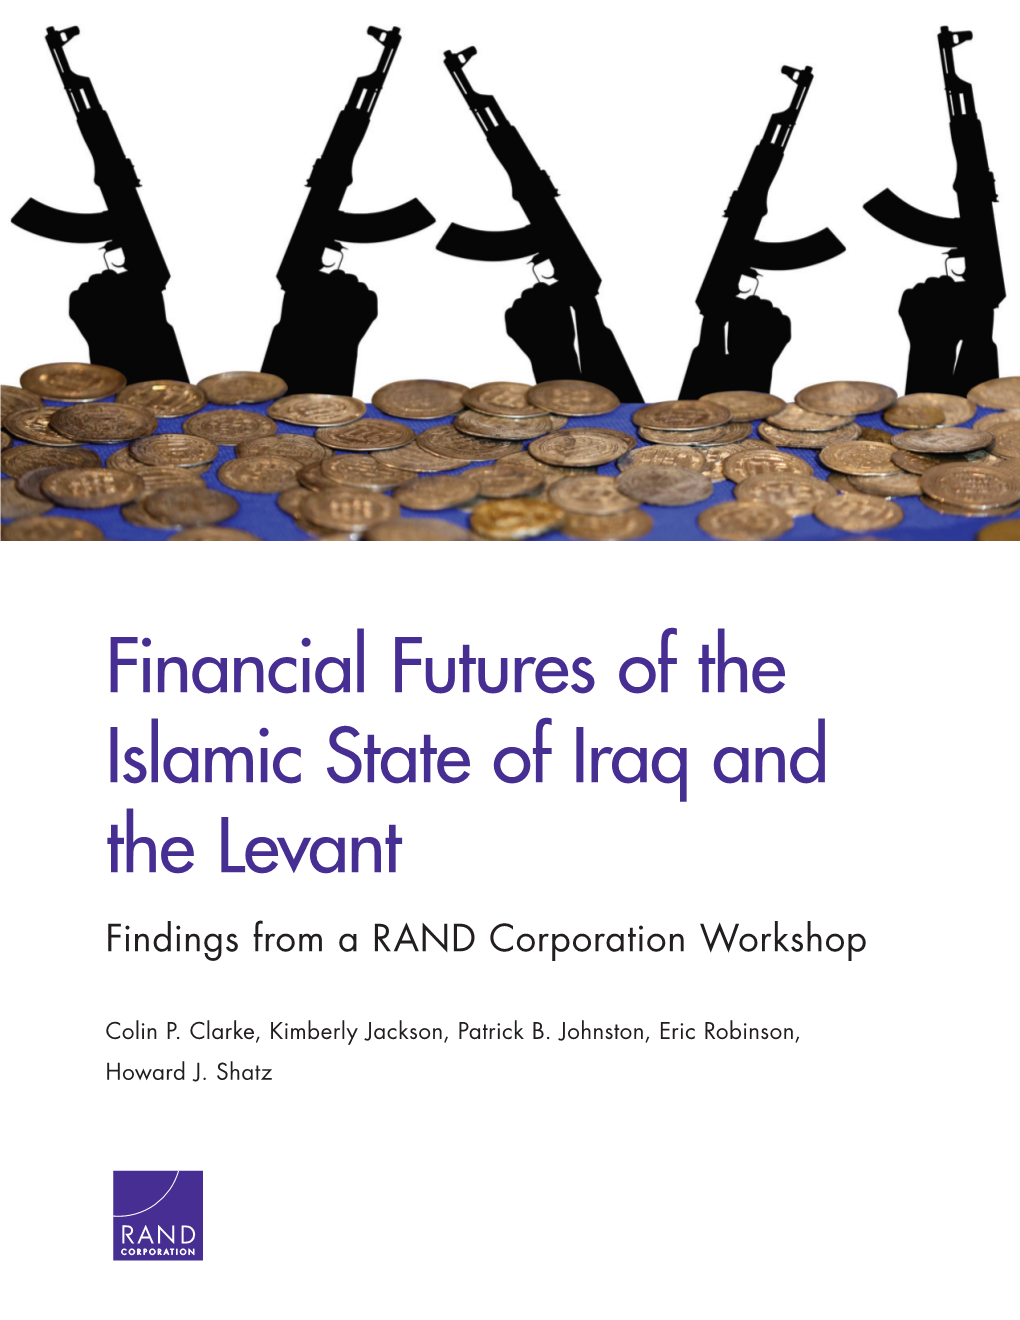 Financial Futures of the Islamic State of Iraq and the Levant: Findings from a RAND Corporation Workshop